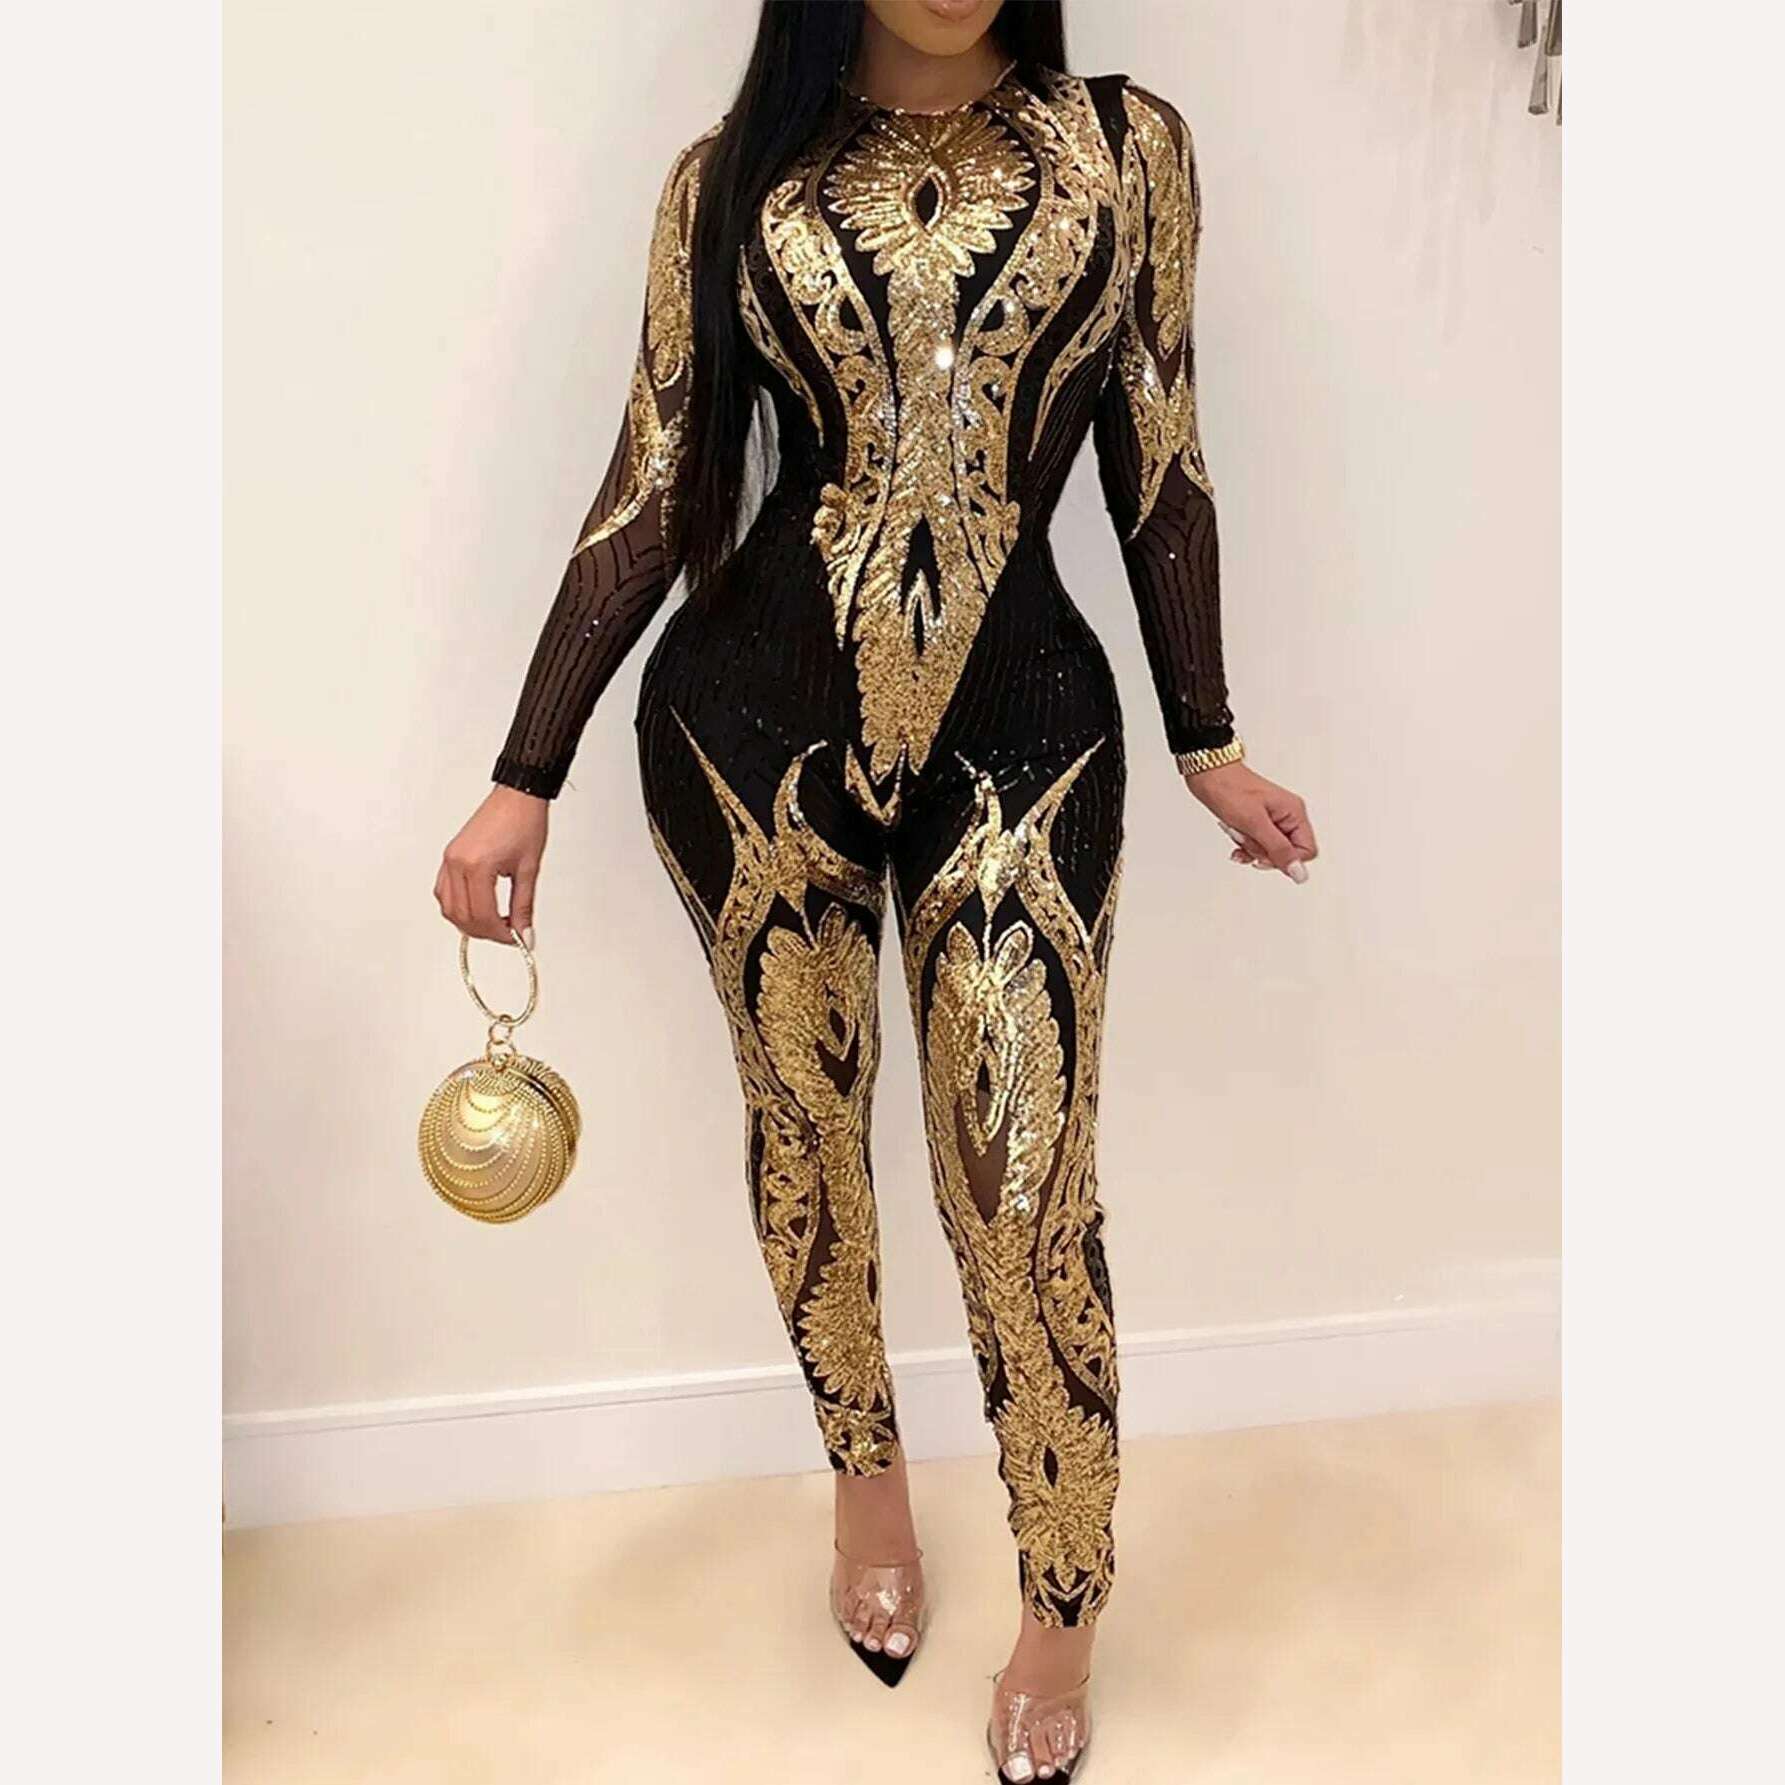 KIMLUD, Sexy Long sleeve Sequin bodycon jumpsuit women body bodysuit one piece birthday party nightclub outfits womens jumpsuits overall, Gold / S, KIMLUD Womens Clothes